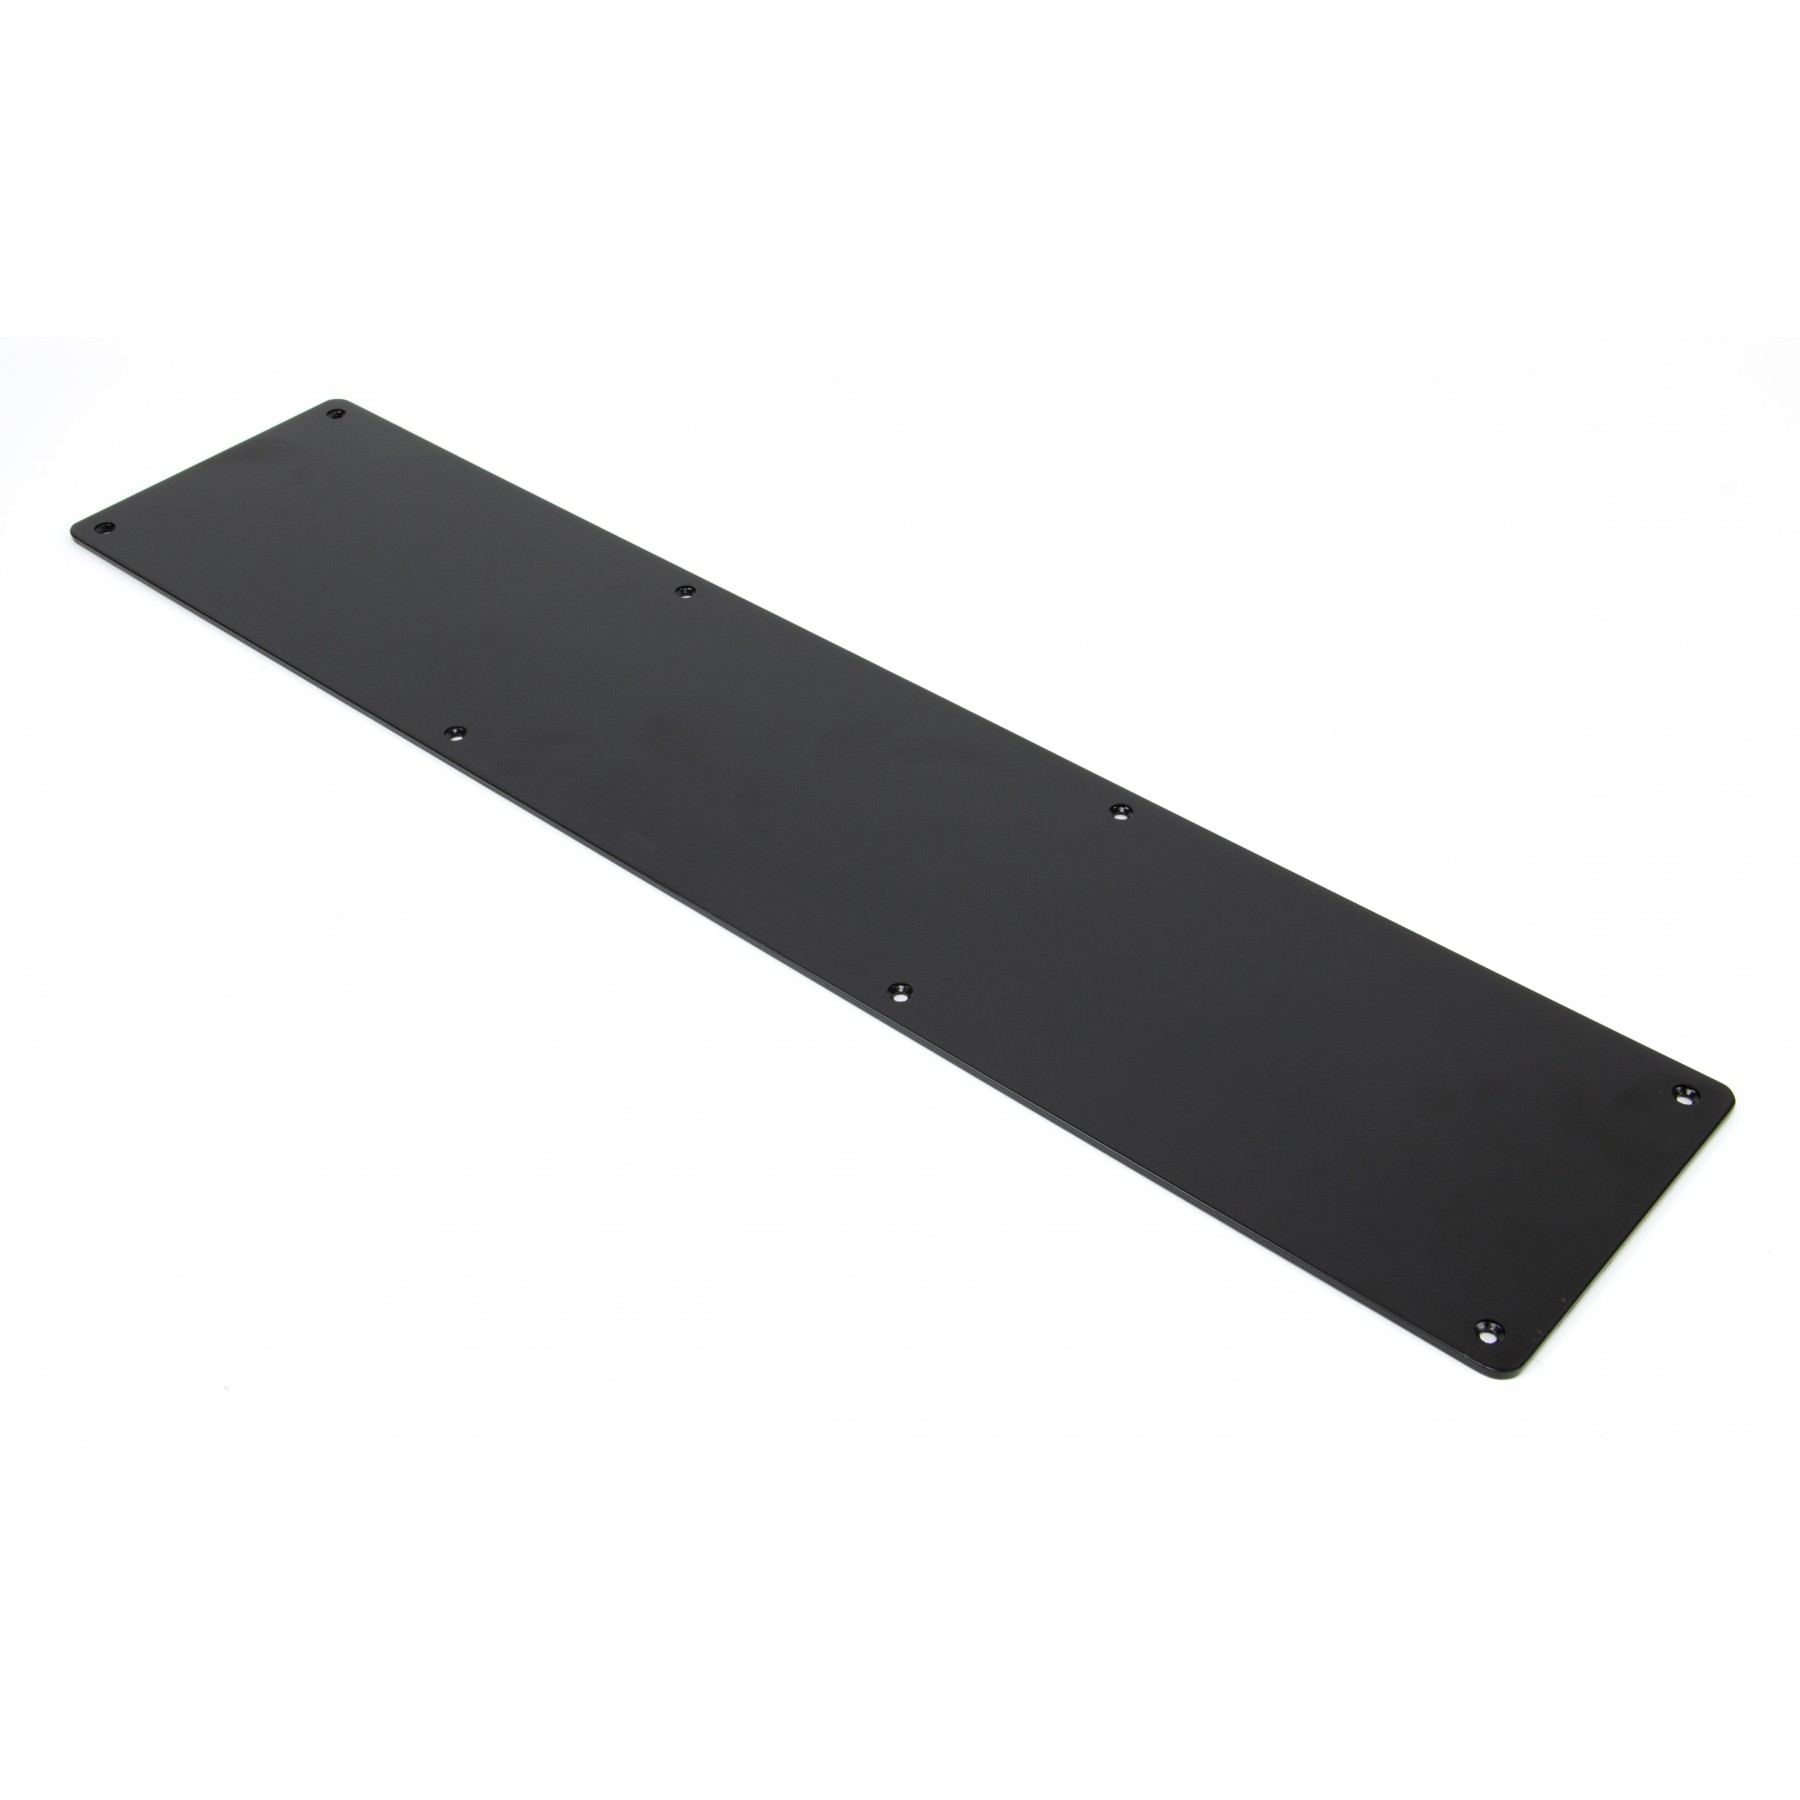 Small Black Kick Plate - Available From Period Home Style